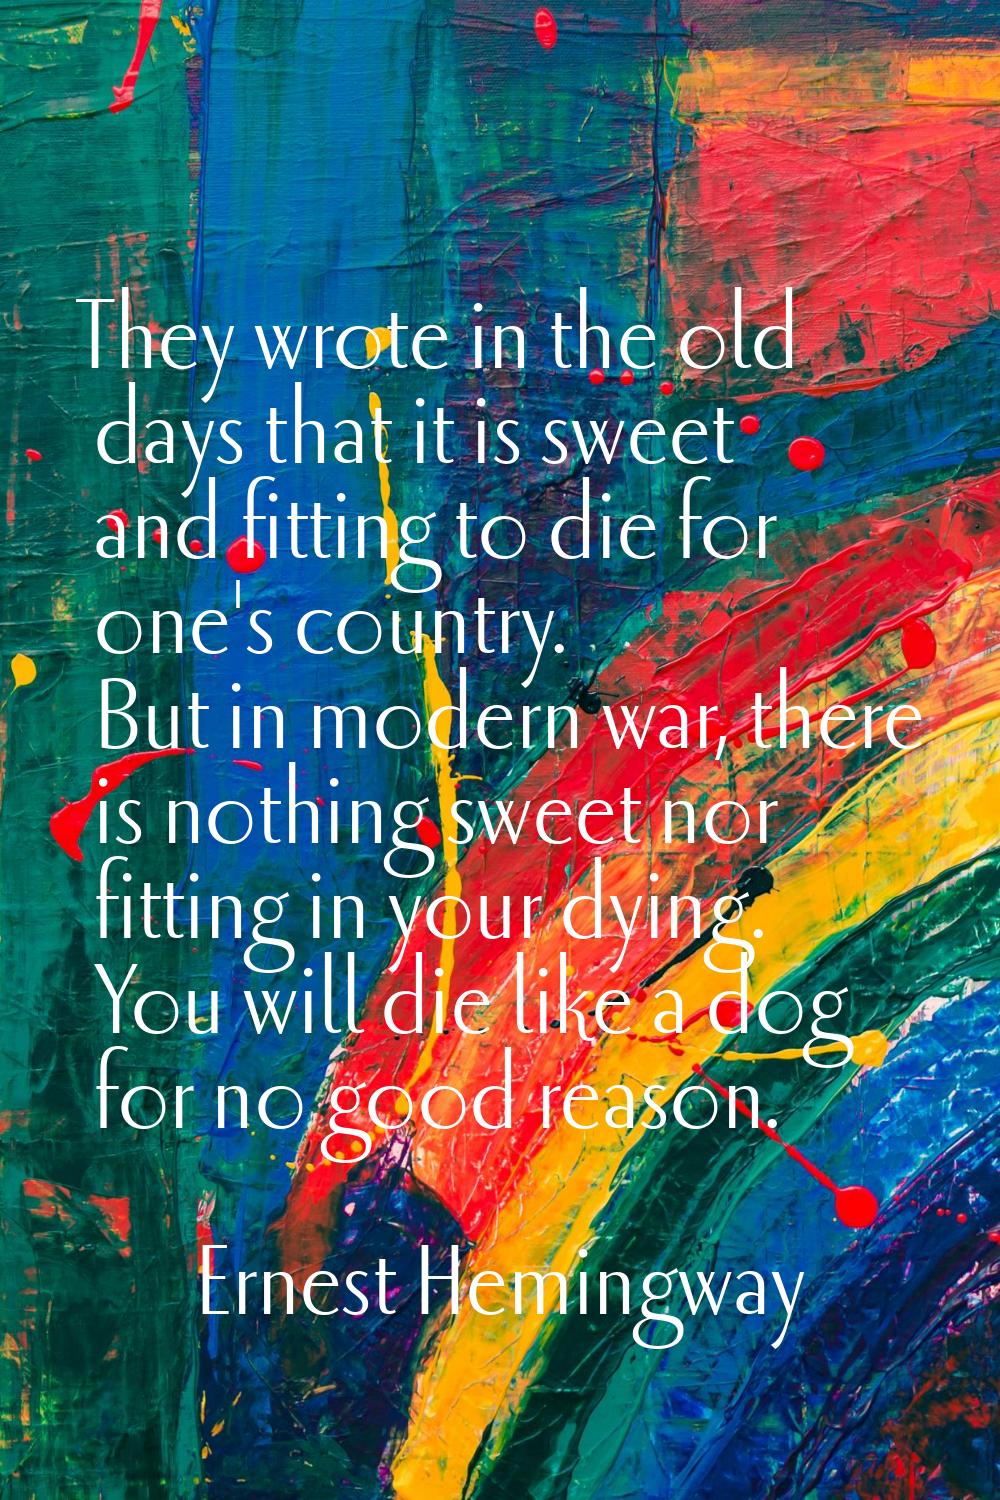 They wrote in the old days that it is sweet and fitting to die for one's country. But in modern war